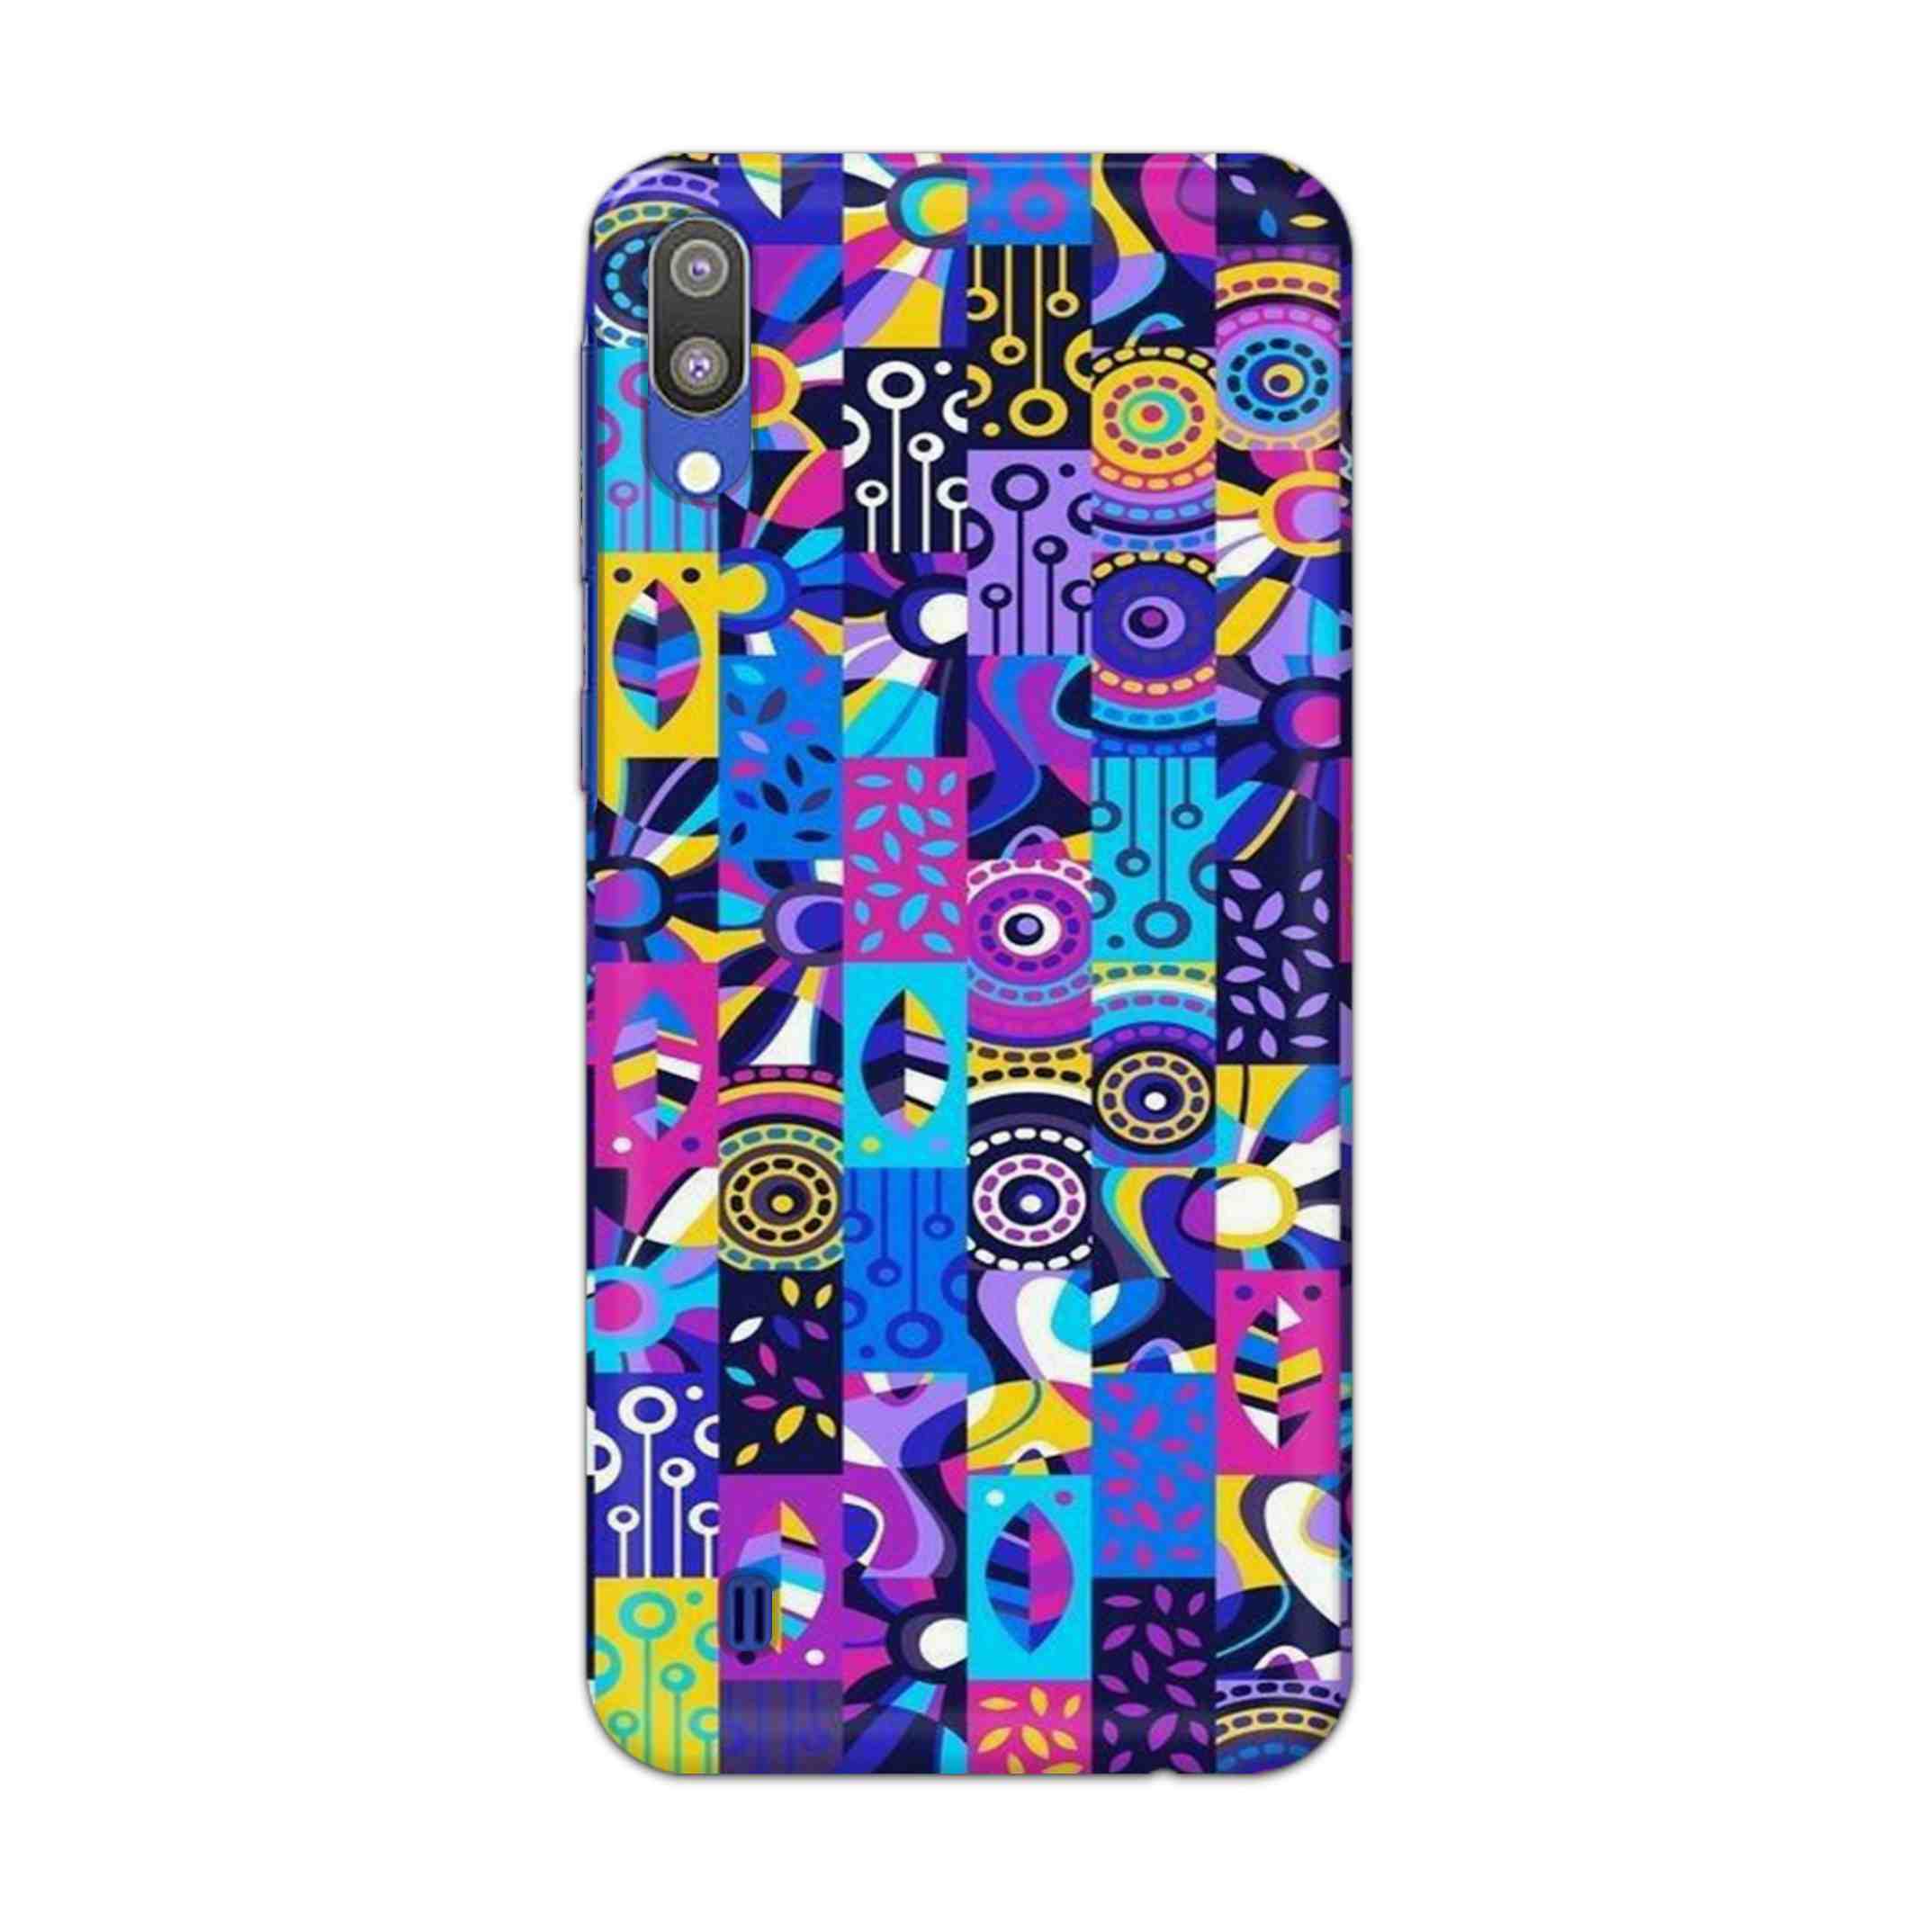 Buy Rainbow Art Hard Back Mobile Phone Case Cover For Samsung Galaxy M10 Online